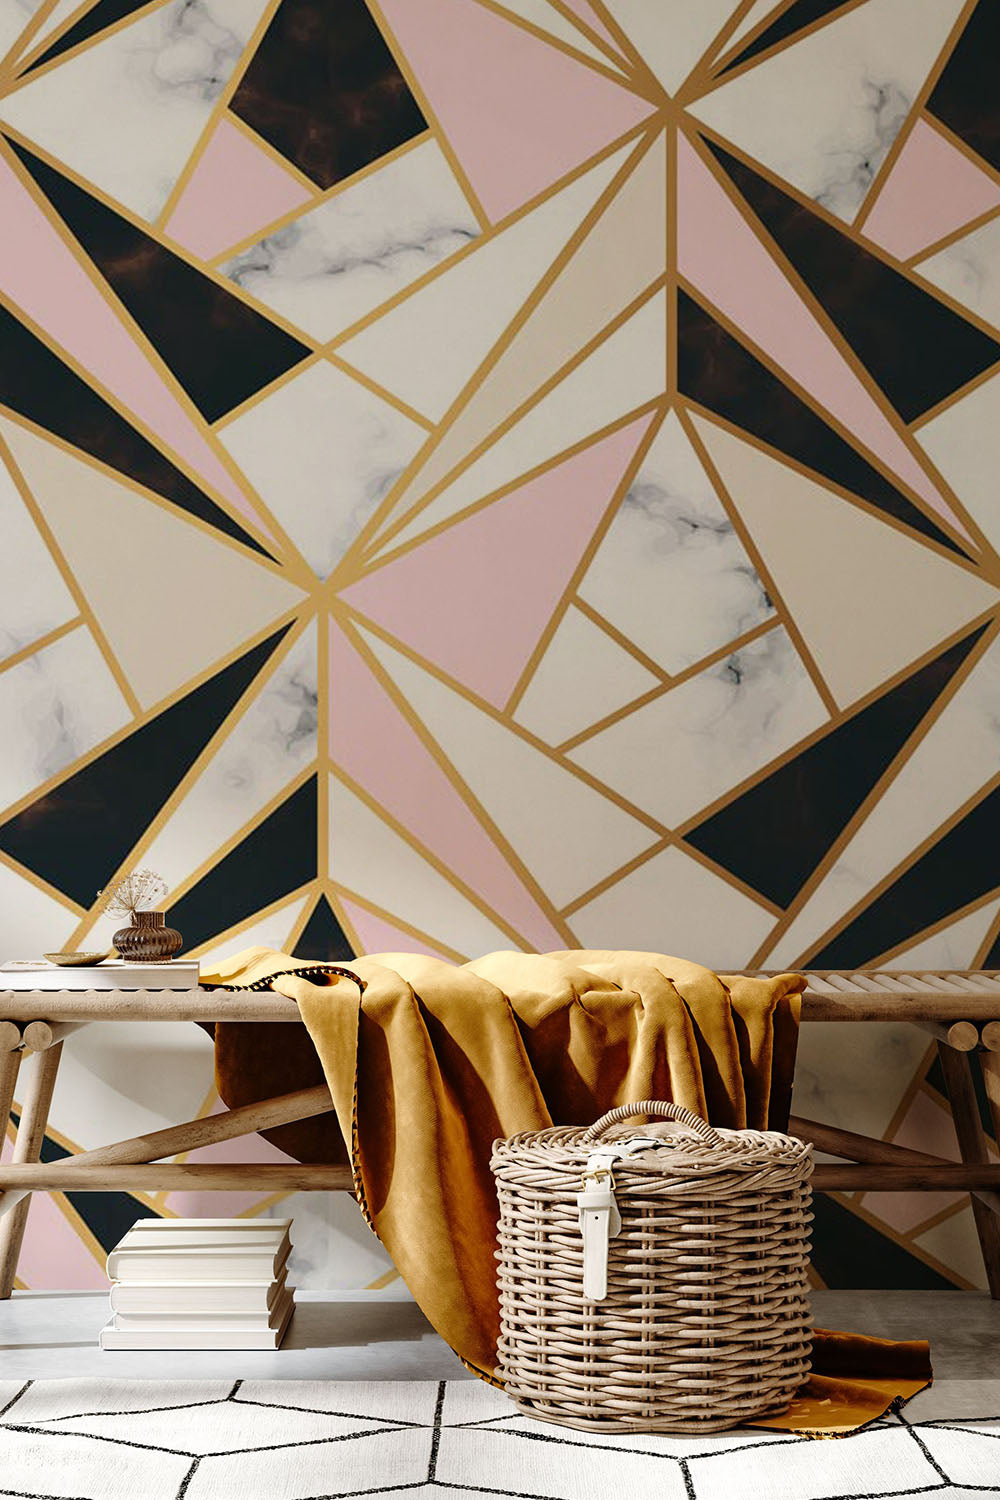 Trendy geometric wall paint has become increasingly popular in modern interior design. The use of geometric patterns